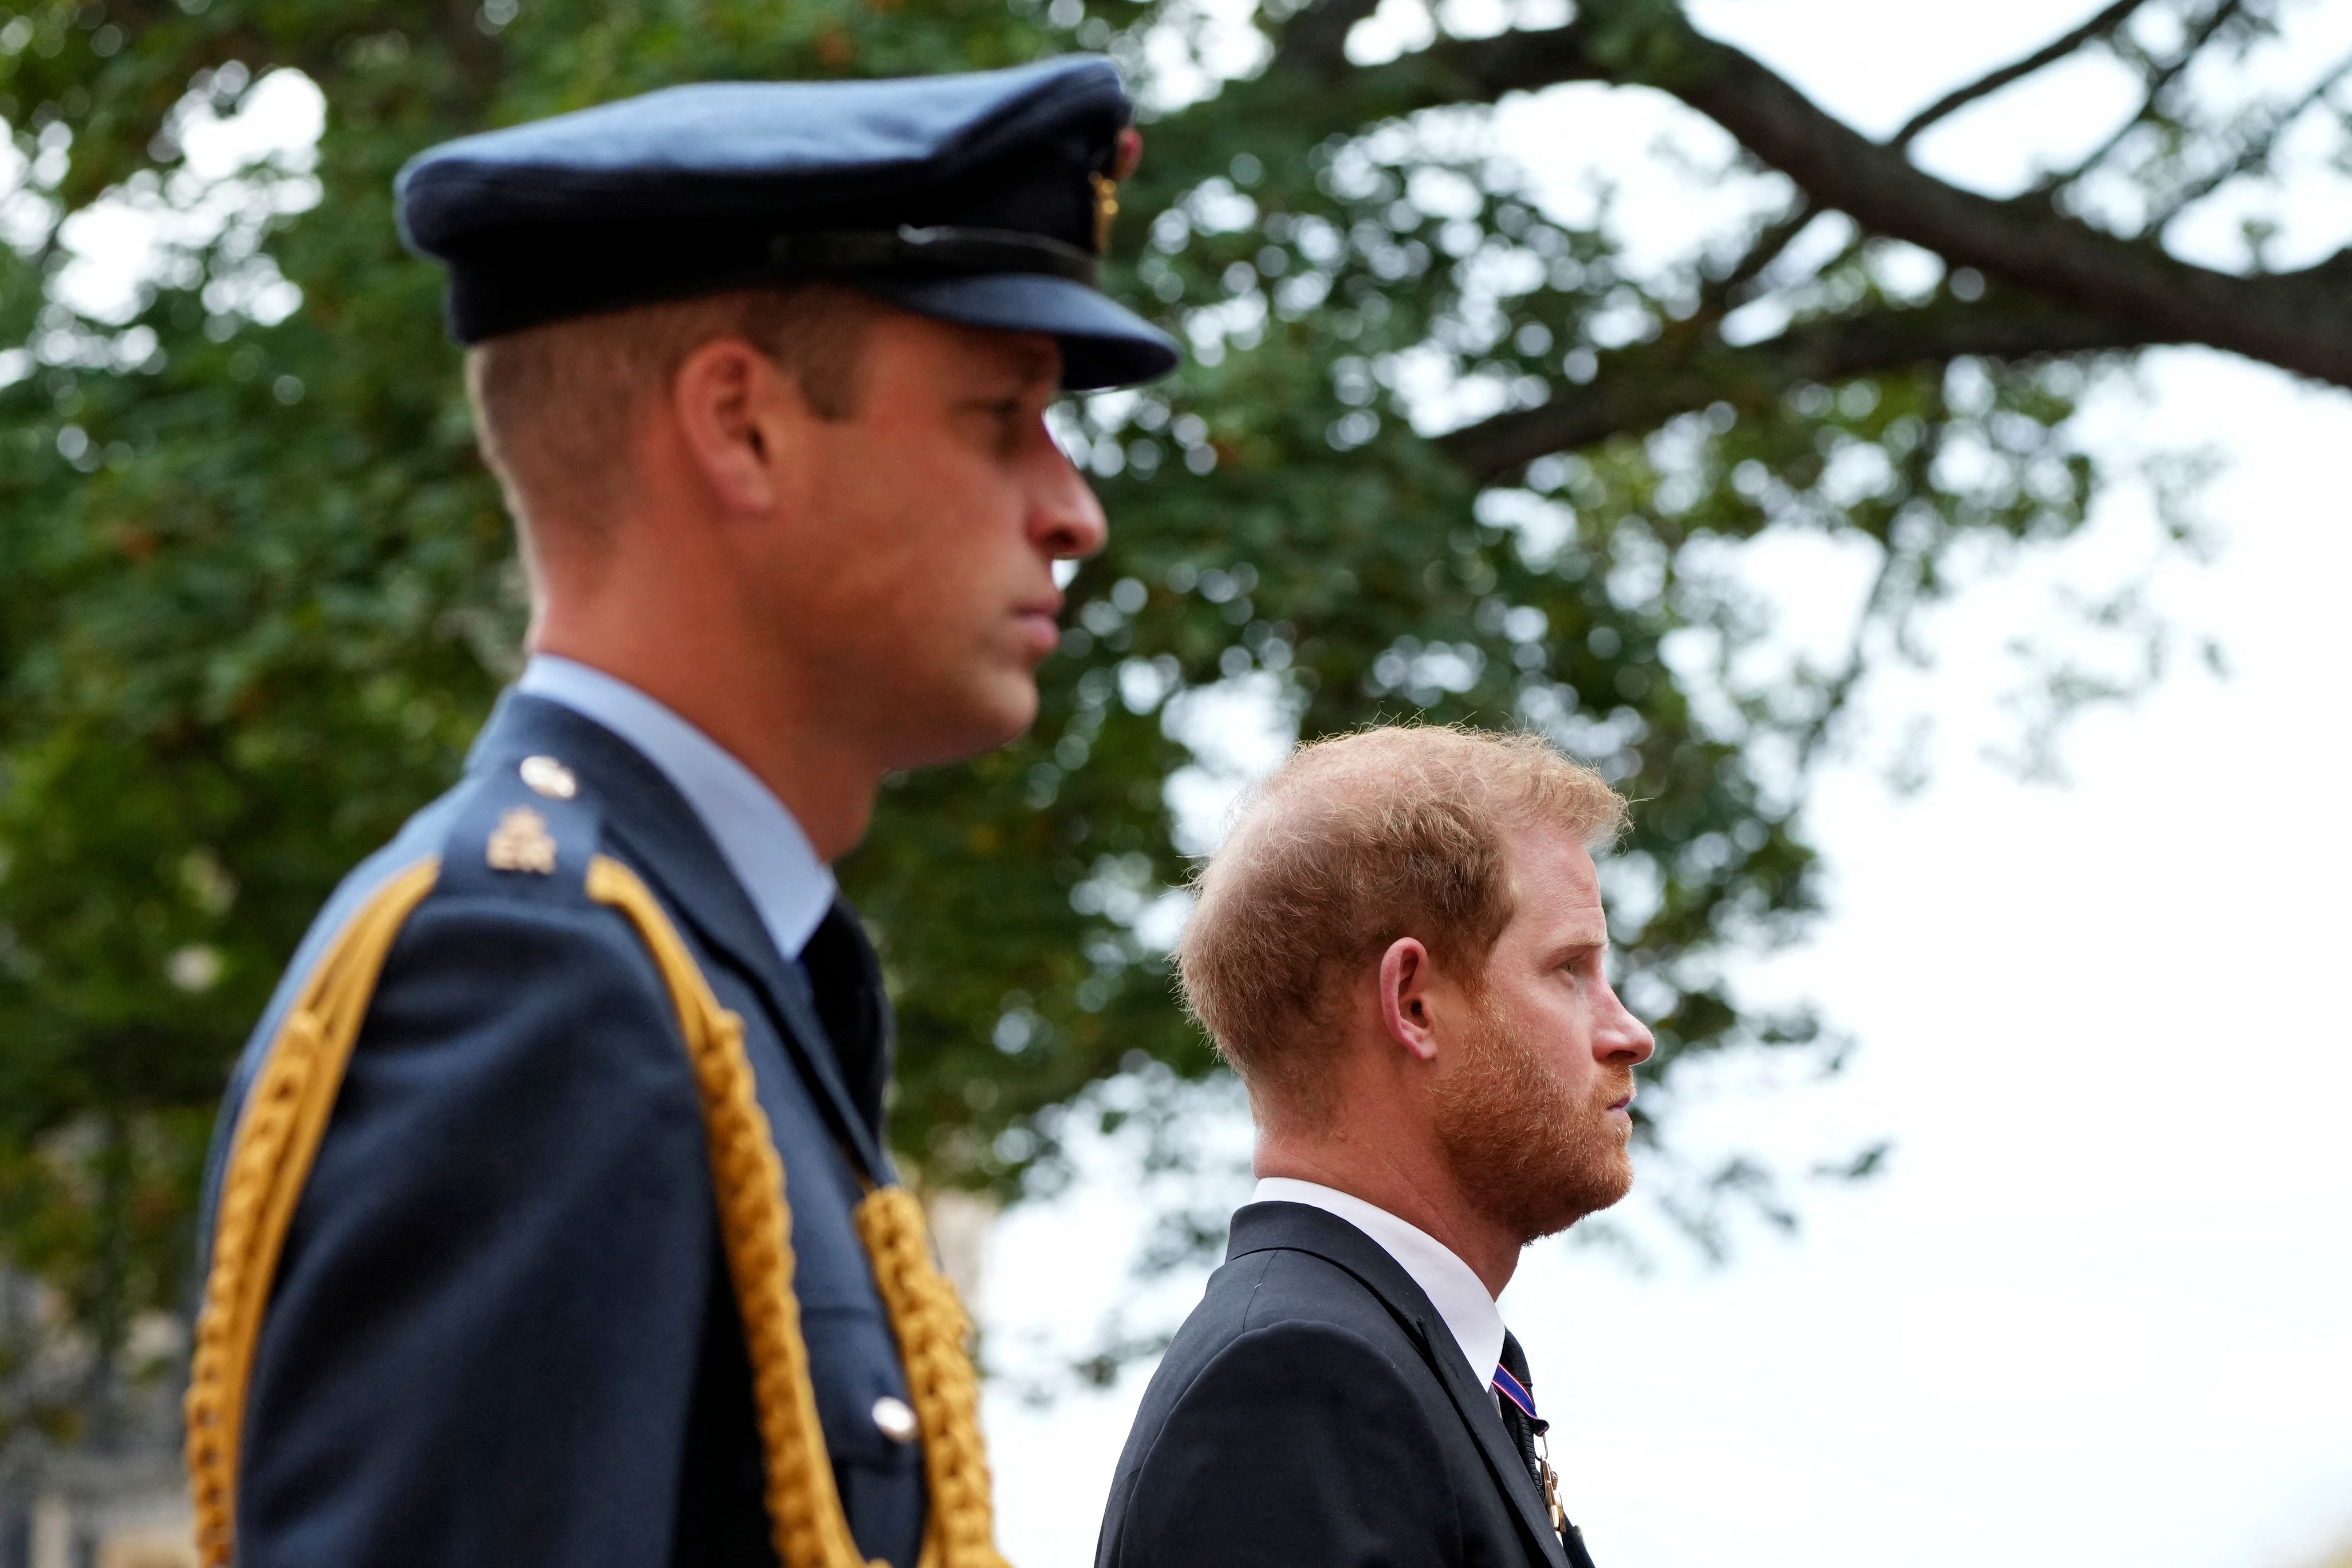 Prince William and Prince Harry at St George's Chapel inside Windsor Castle on September 19, 2022, ahead of the Committal Service for Queen Elizabeth II | Source: Getty Images